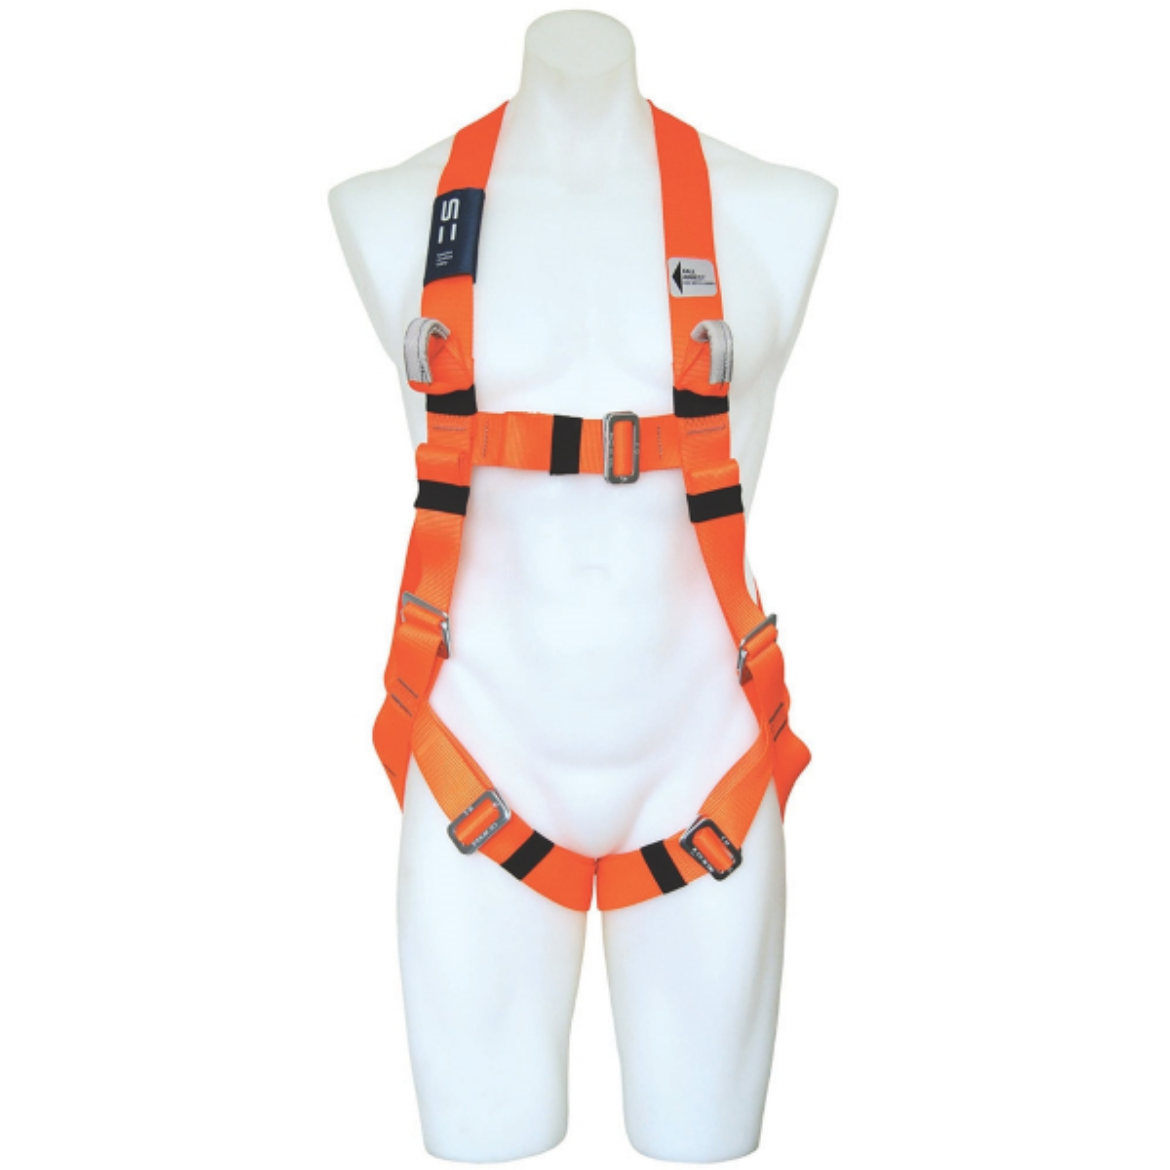 Picture of BUDGET HARNESS WITH REAR D, FRONT FALL ARREST LOOPS, FULLY ADJUSTABLE LEG, SHOULDER AND CHEST STRAPS. ONE SIZE ONLY.